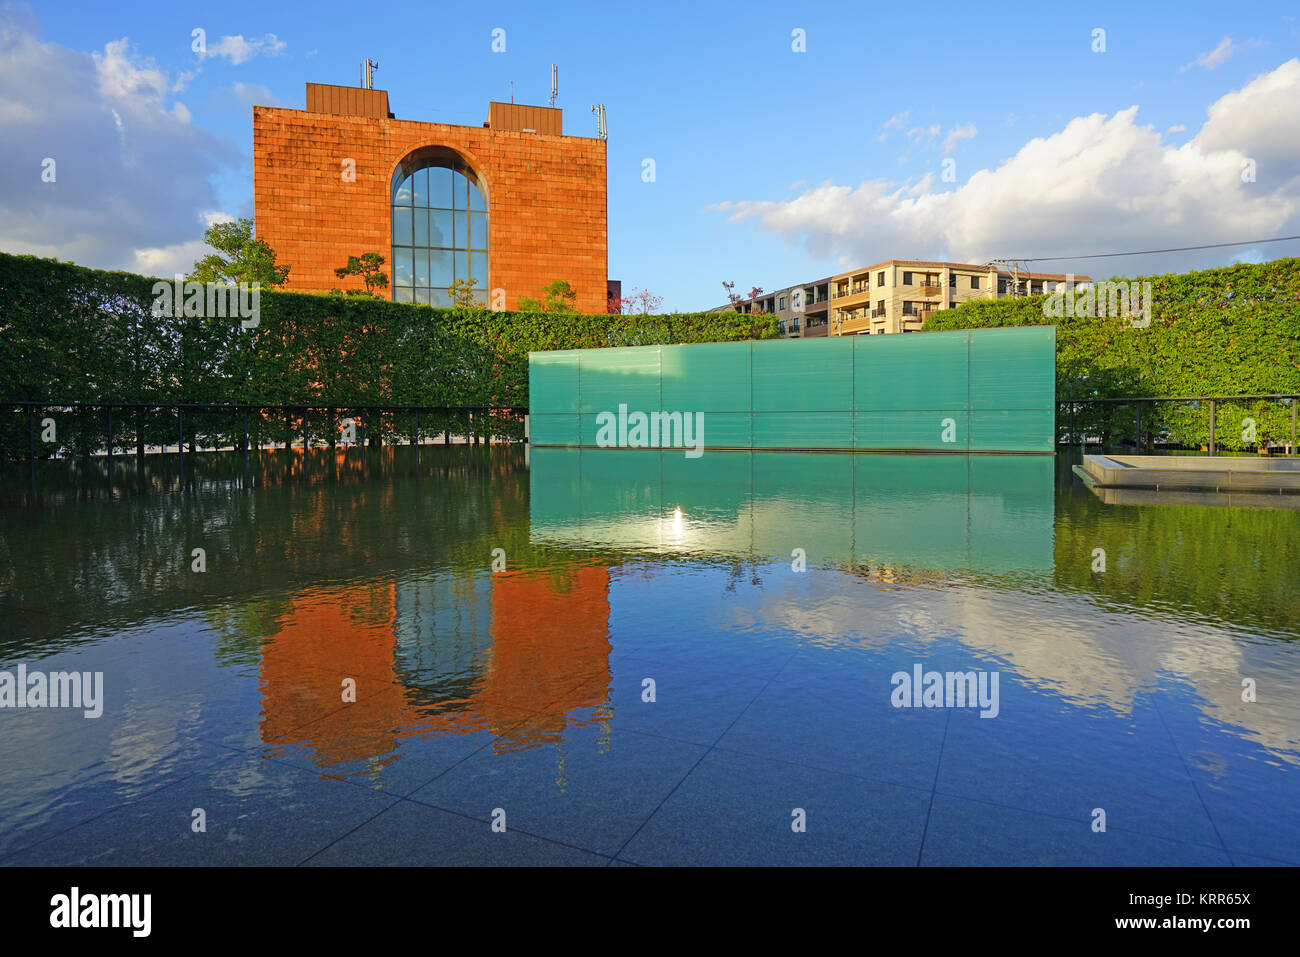 View of the Nagasaki National Peace Memorial Hall for the Atomic Bomb Victims located in Nagasaki, Japan Stock Photo